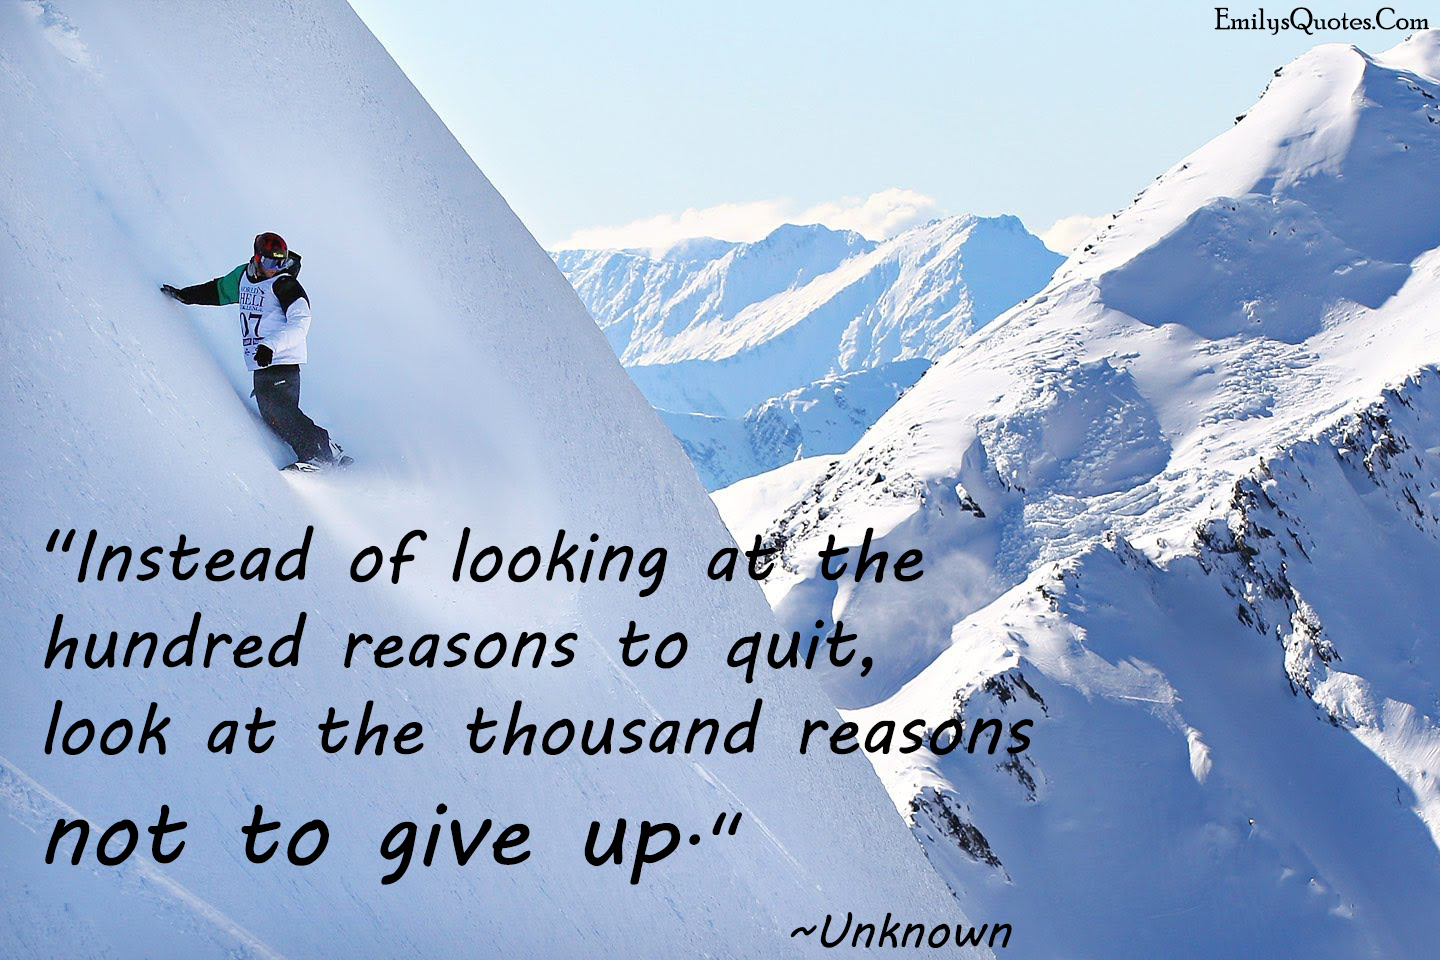 Instead of looking at the hundred reasons to quit, look at the thousand reasons not to give up